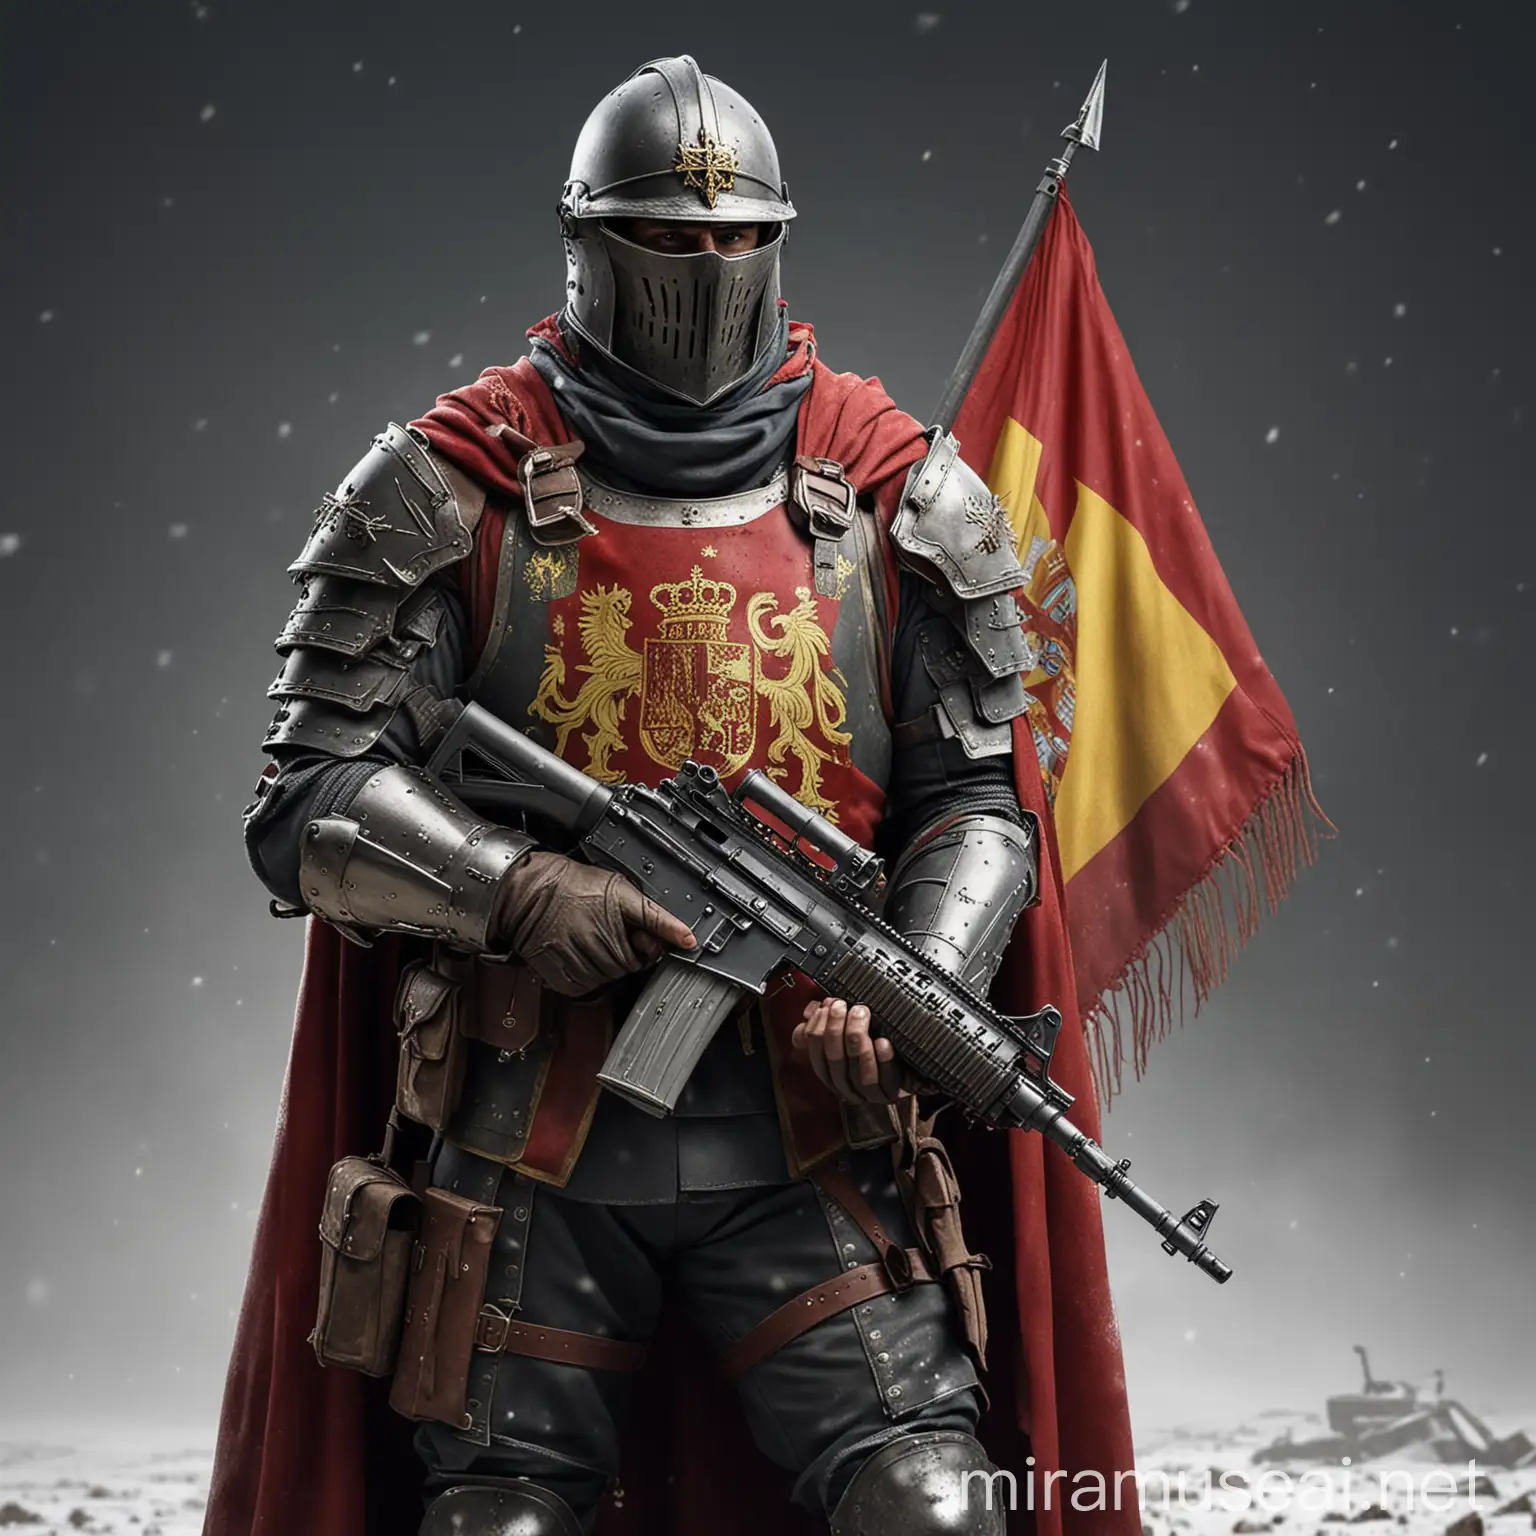 Spain soldier as middle age holy knight  in modern world.He holds machine gun . Spain flag colors to armor.War background ,ground is snow and blood.He has modern armor with cape and cross,helmet,iron mask..Realistic,detailed.He is in battlefield